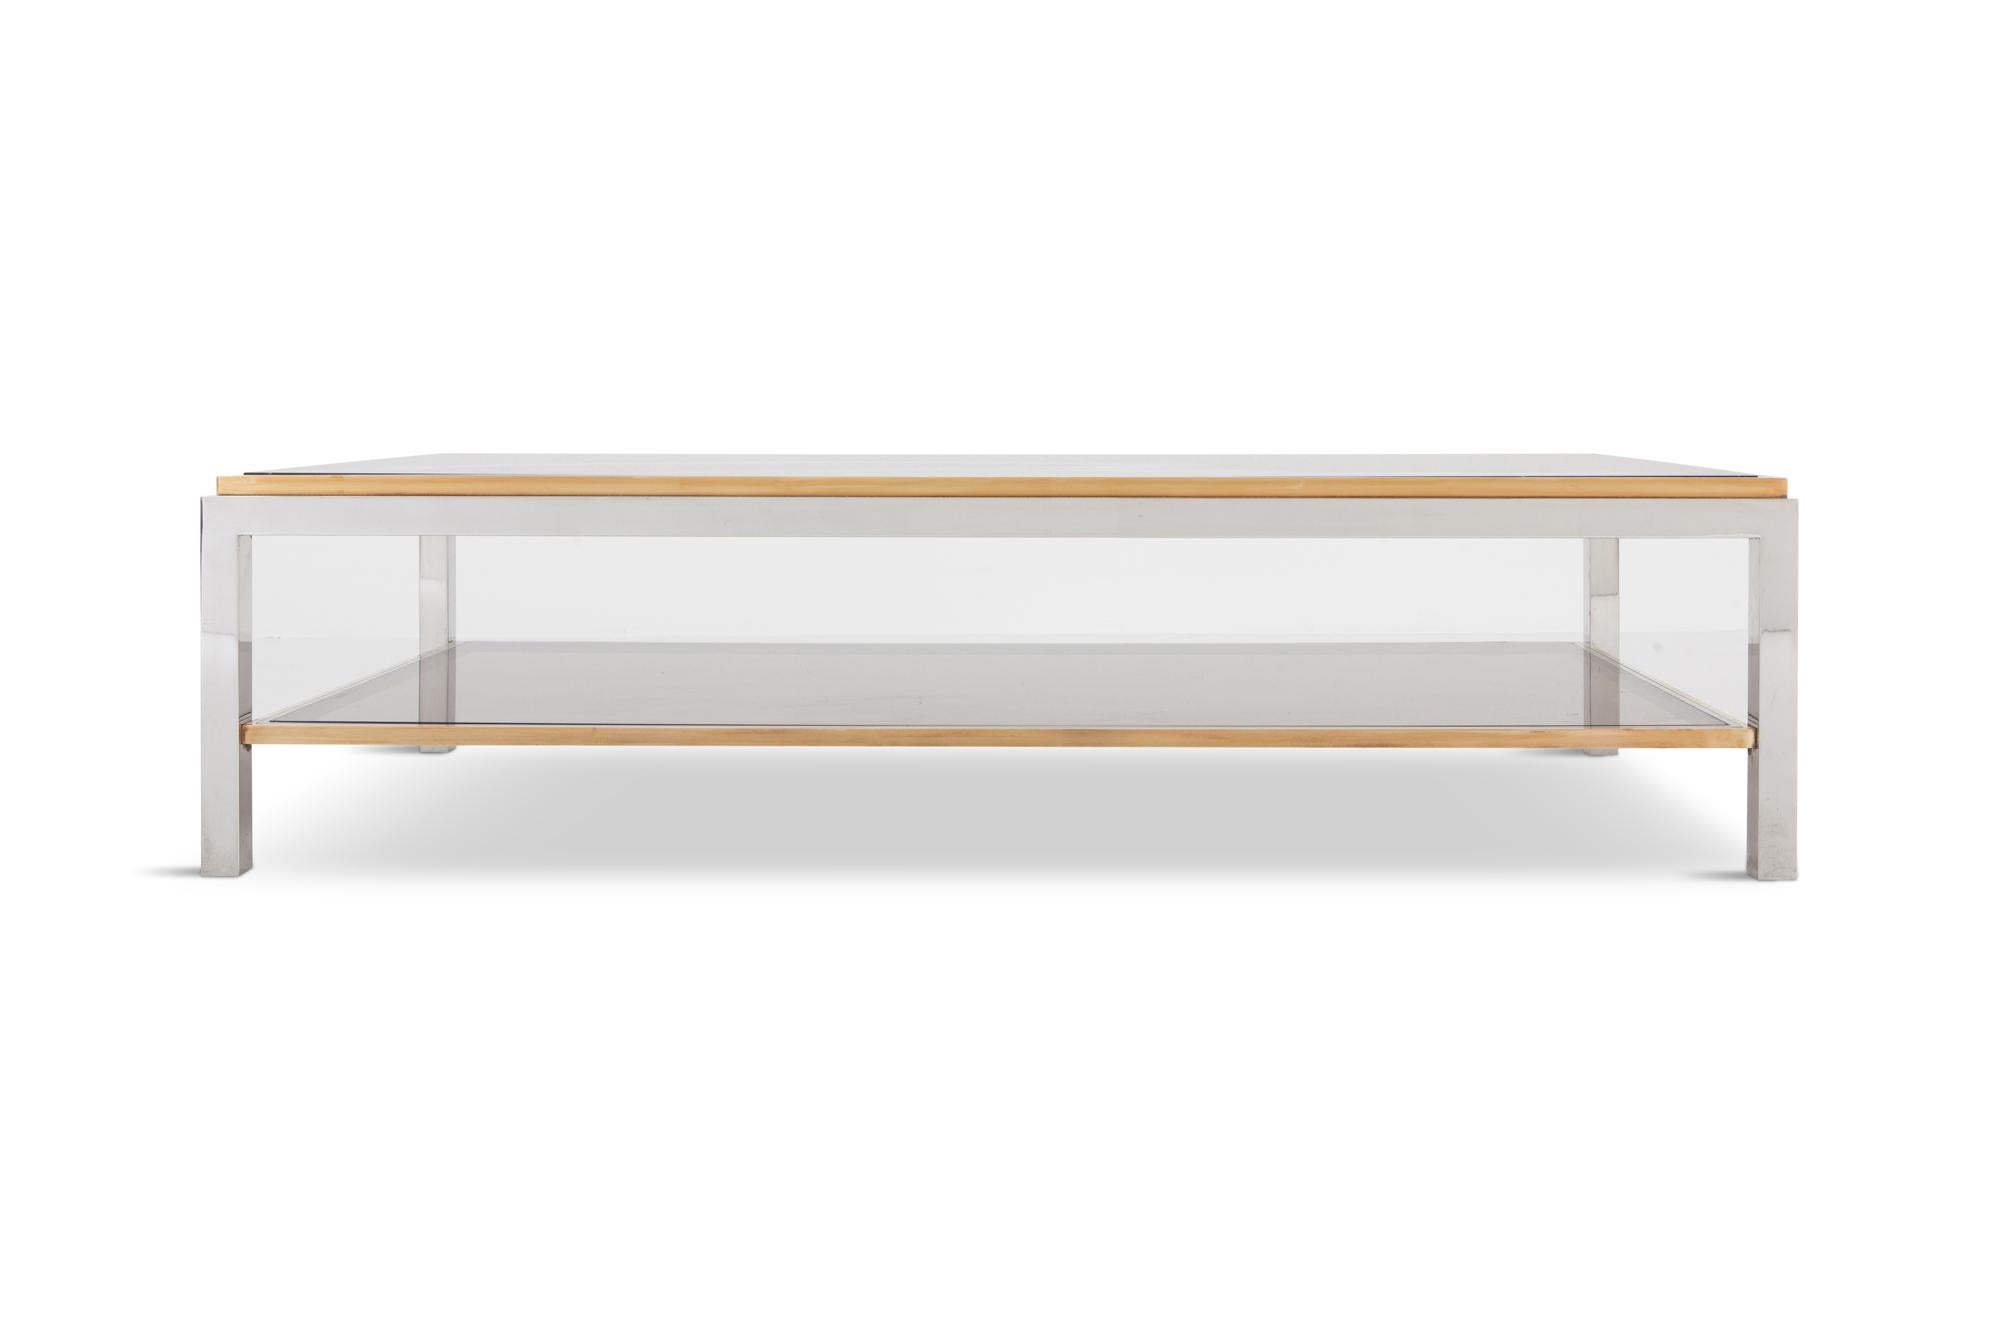 Post-Modern Willy Rizzo Rectangular Coffee Table in Brass, Chrome and Glass